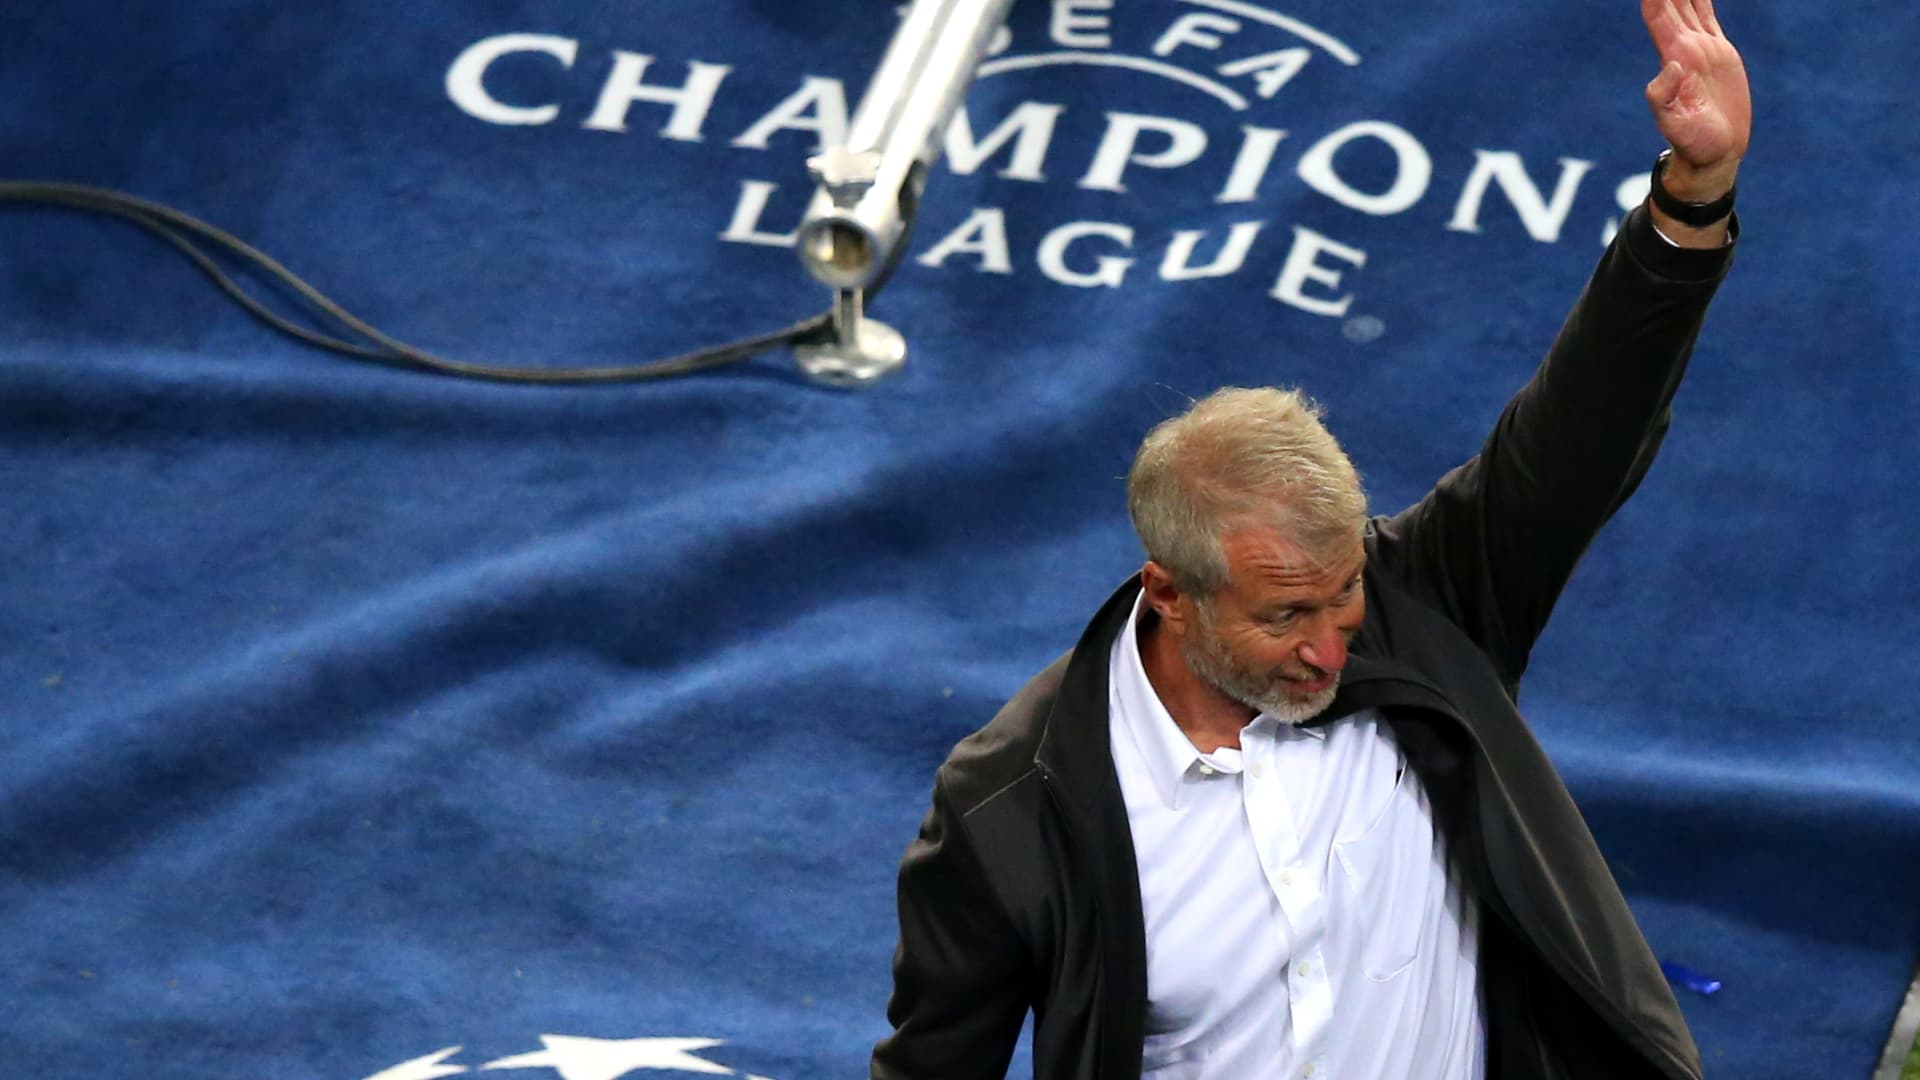 Roman Abramovich, owner of Chelsea, waves at fans after the UEFA Champions League Final between Manchester City and Chelsea FC at Estadio do Dragao on May 29, 2021, in Porto, Portugal.